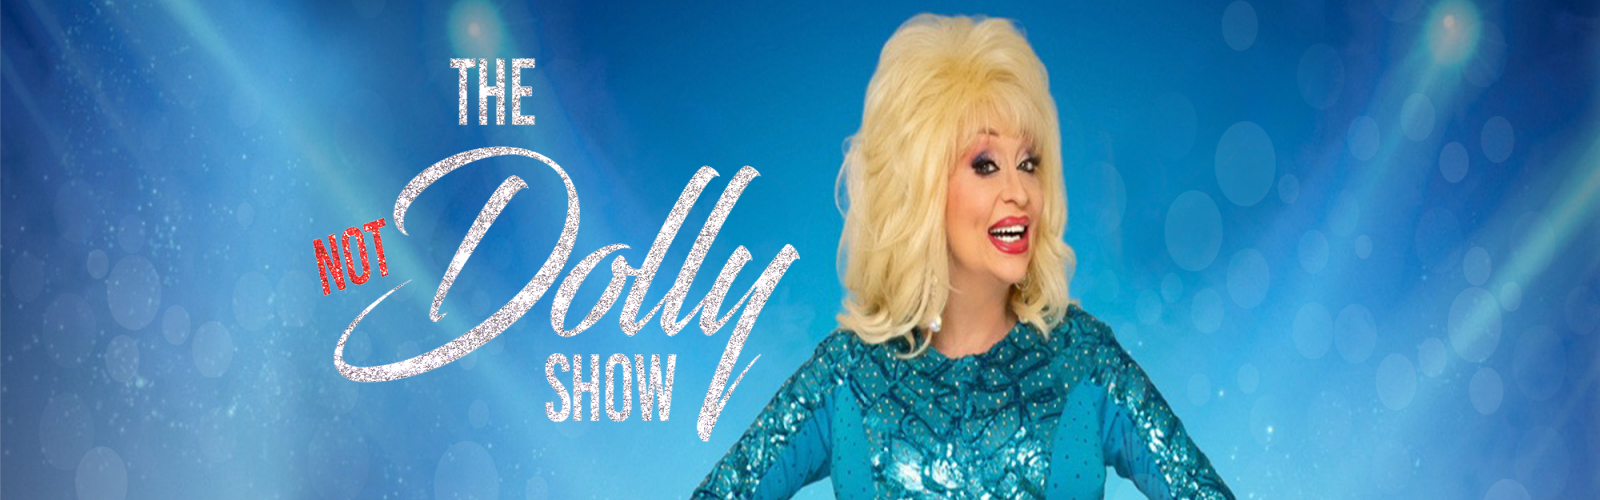 THE NOT DOLLY SHOW, featuring Vancie Vega